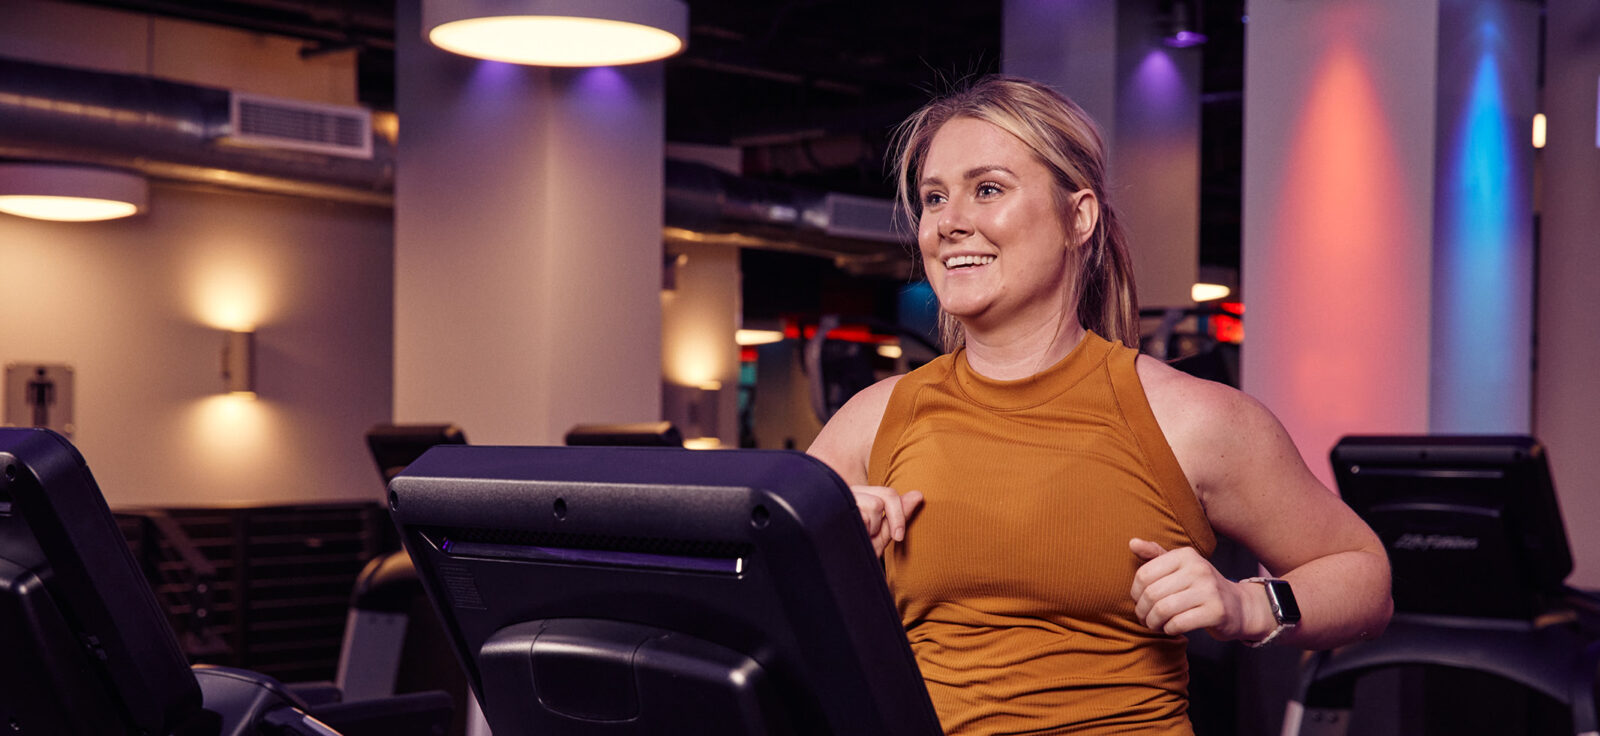 How Much is a Gym Membership: What to Expect from Every Price Point - Crunch